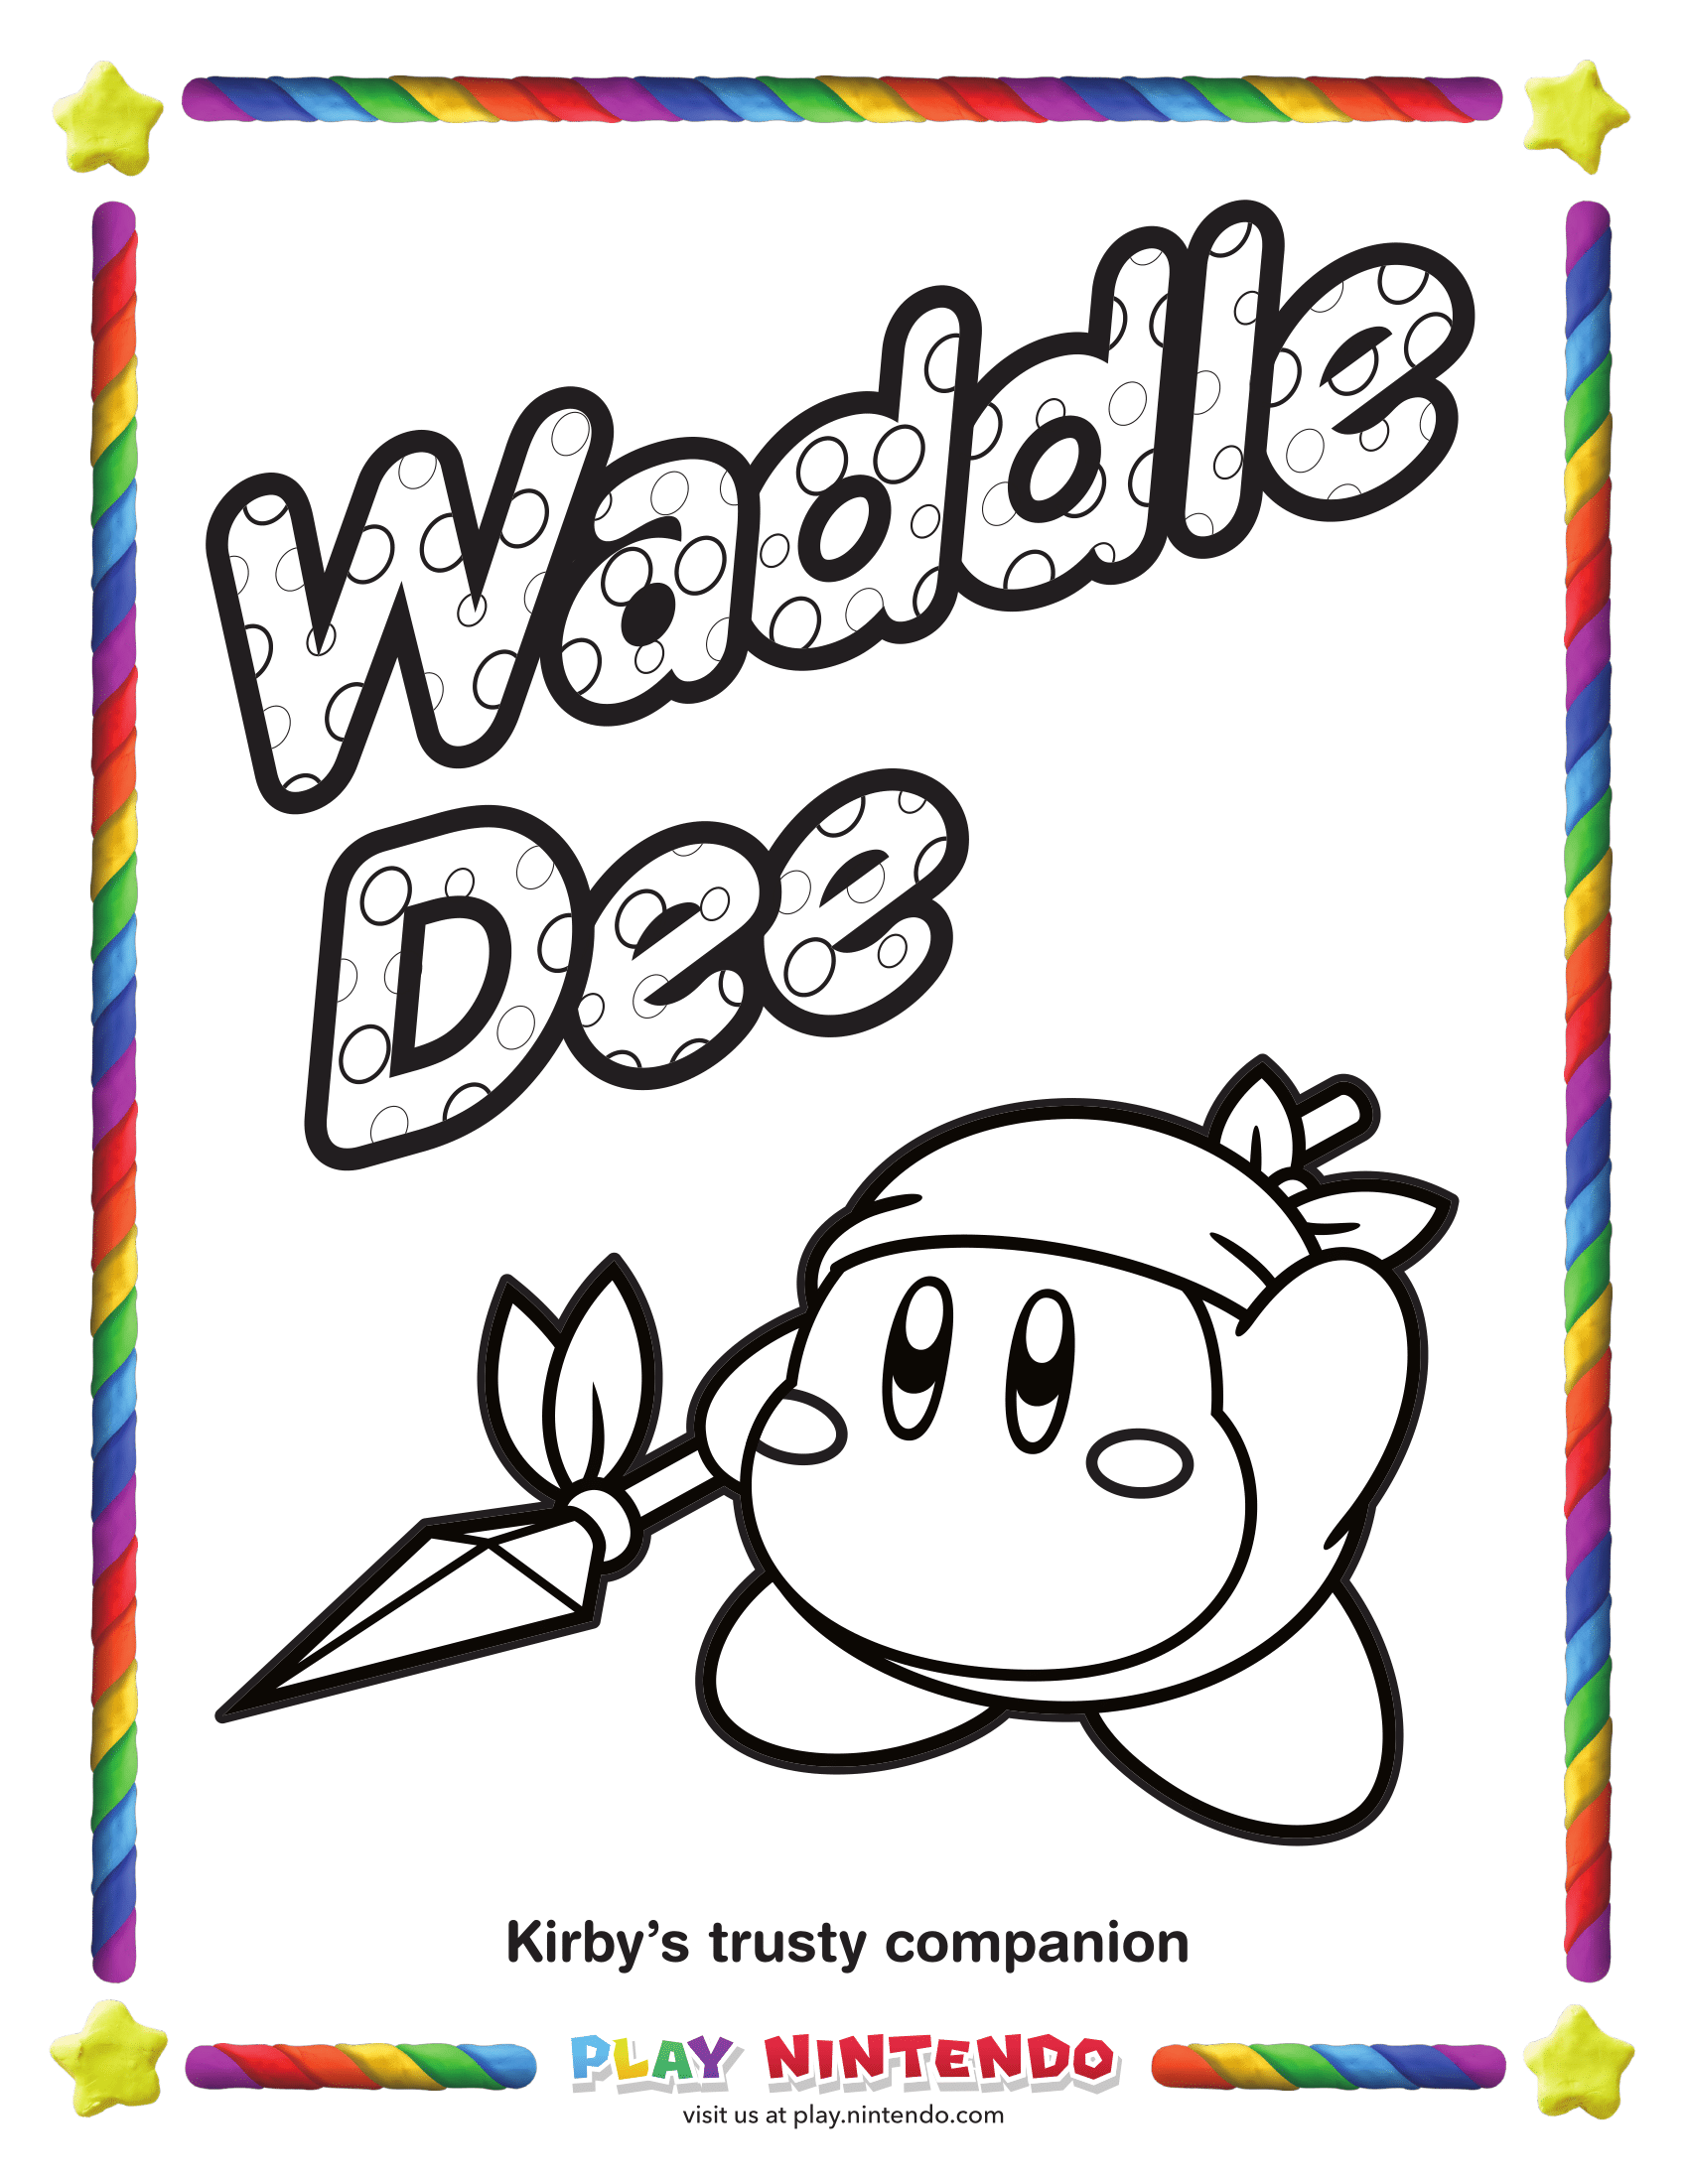 Nintendo Releases Special Coloring Pages For Kirby’s 25th Anniversary